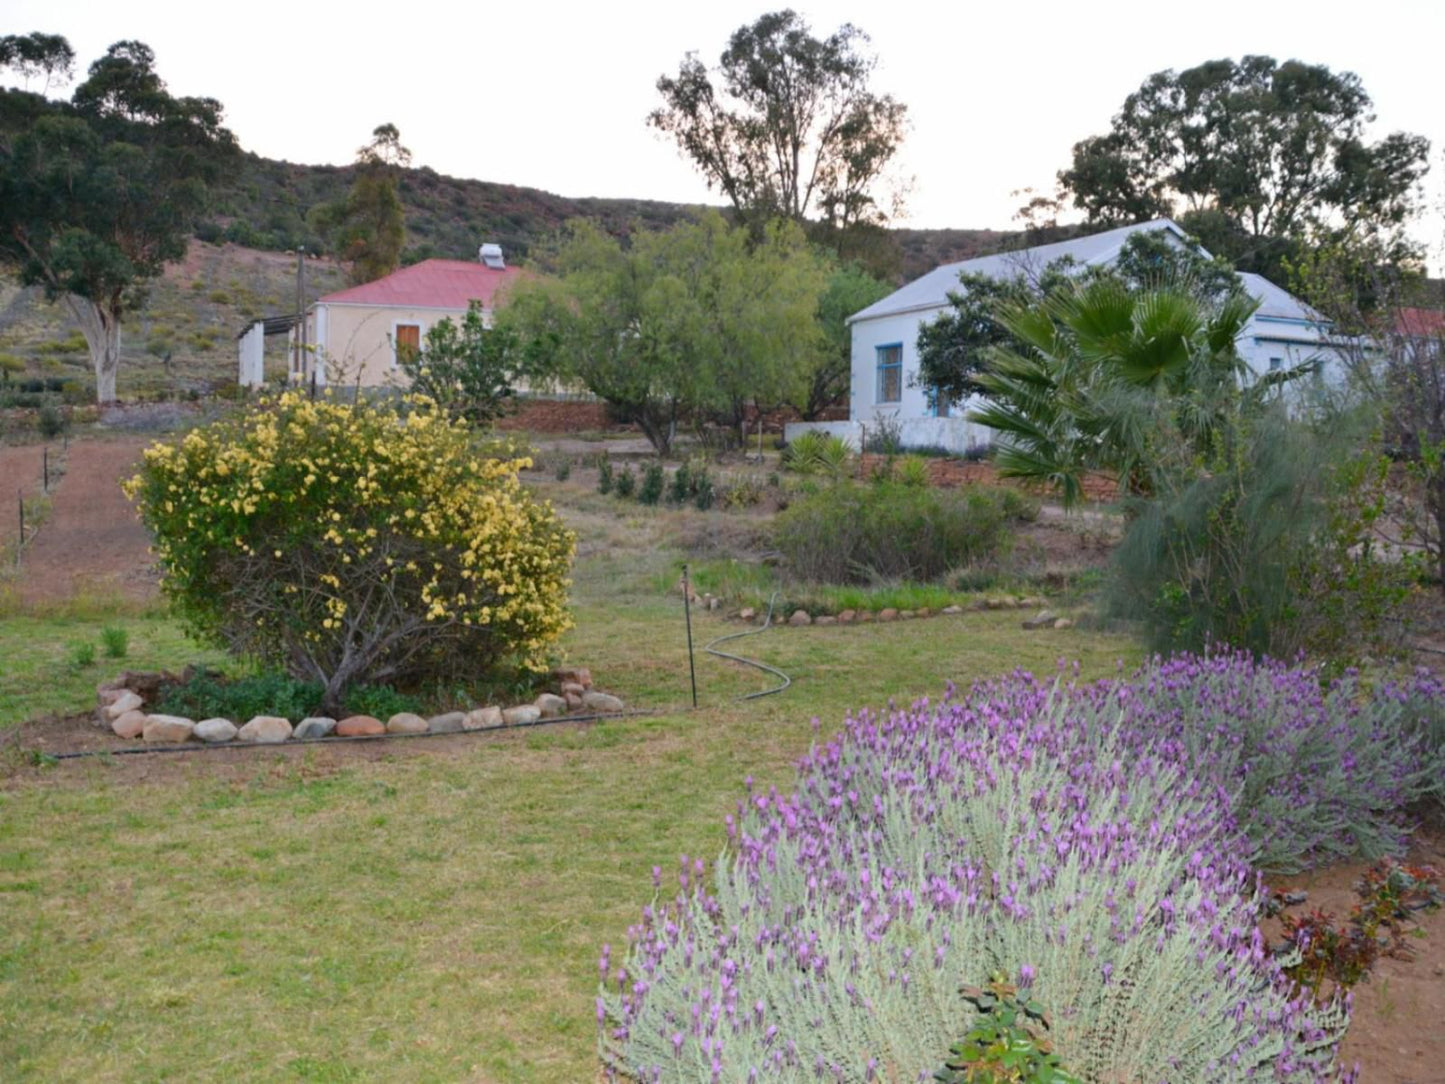 The Country Garden Ladismith Western Cape South Africa House, Building, Architecture, Plant, Nature, Garden